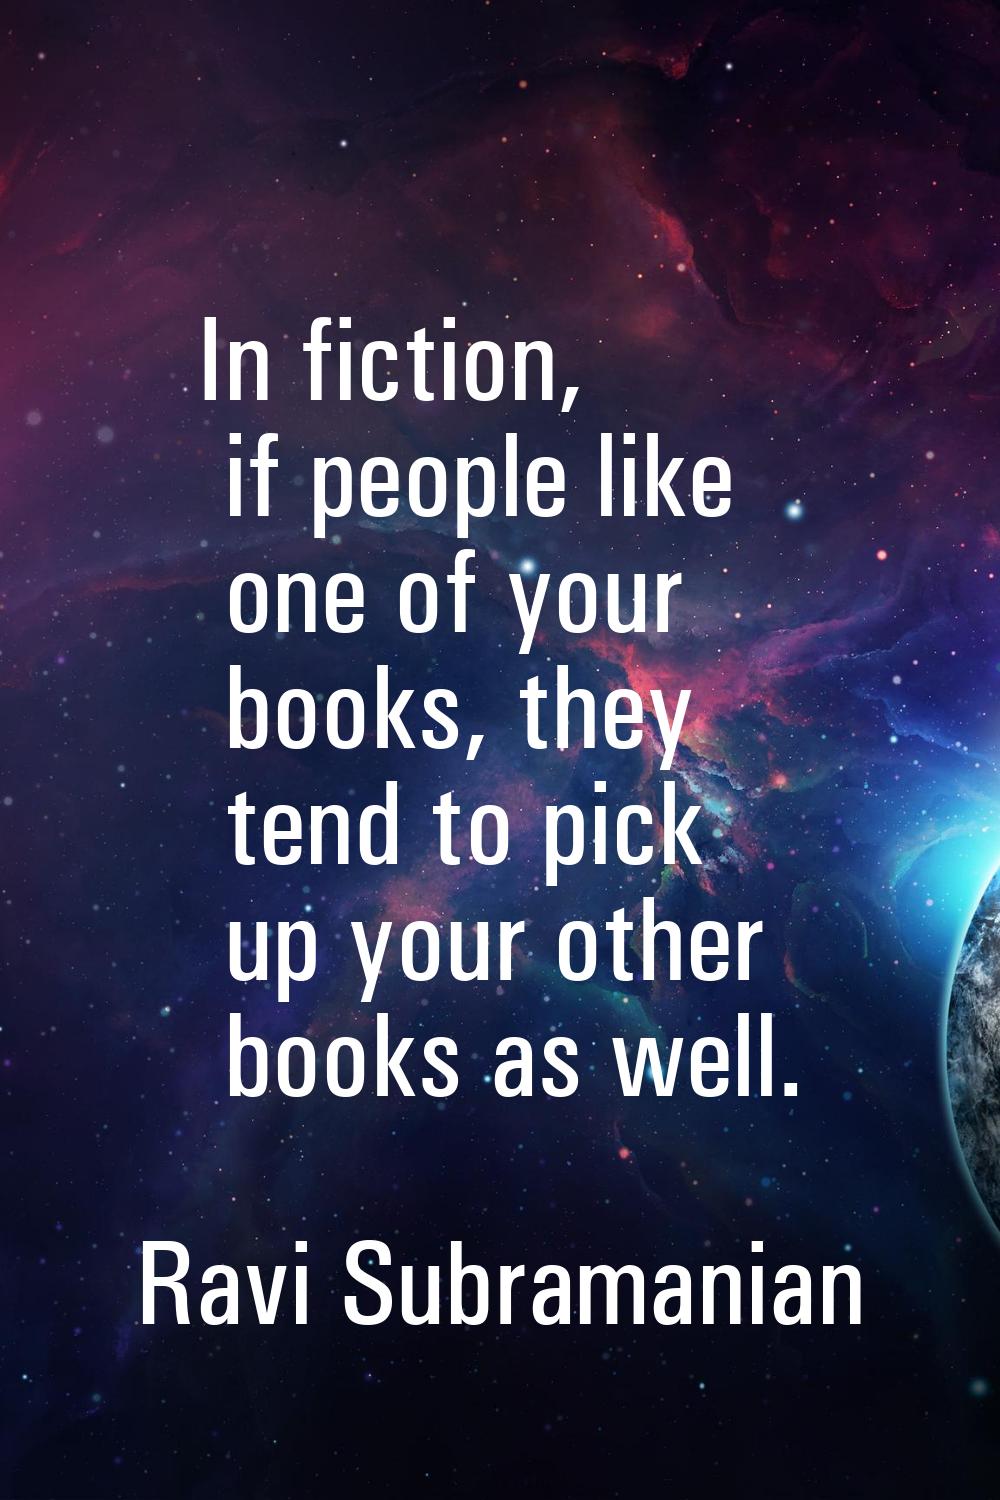 In fiction, if people like one of your books, they tend to pick up your other books as well.